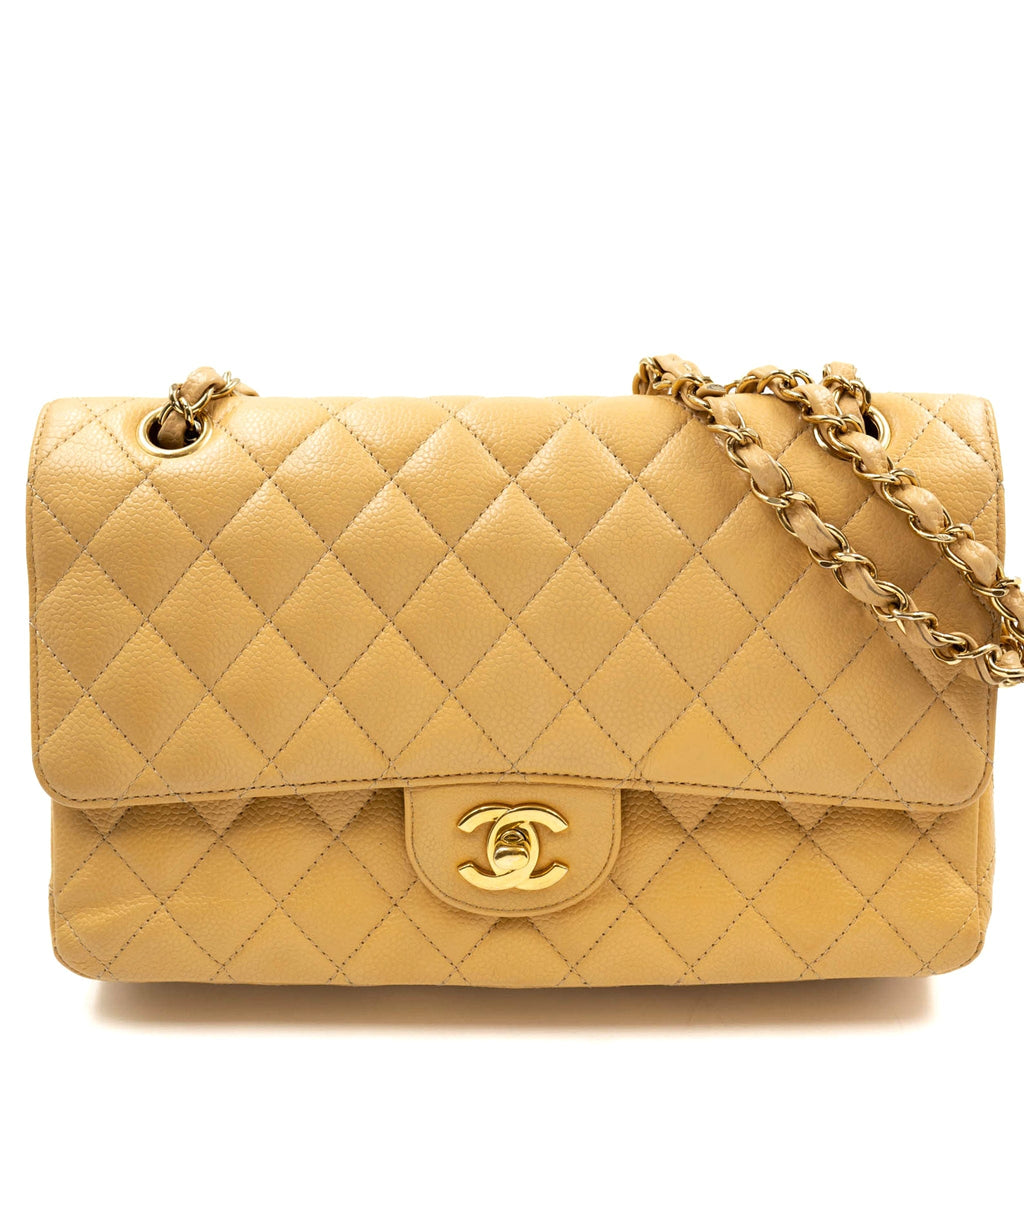 Chanel Beige Caviar skin Bag with GHW - AWL3822 – LuxuryPromise